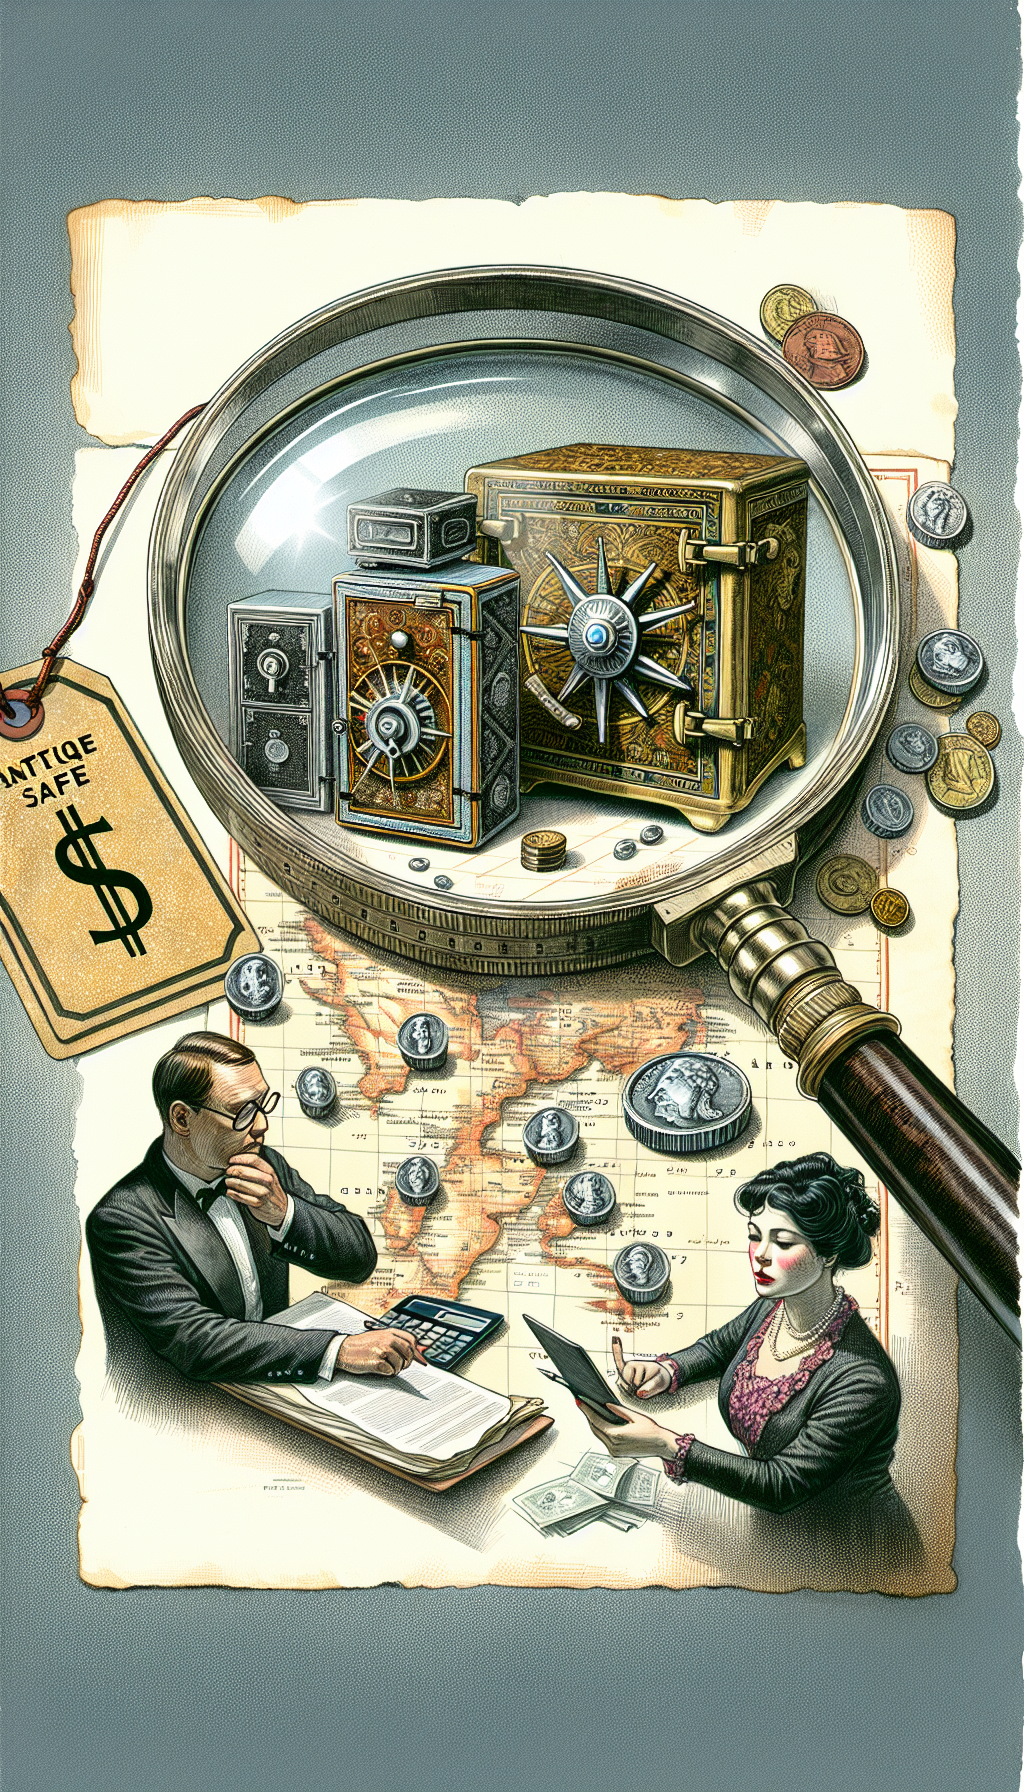 An illustration showcasing a magnifying glass hovering over a map dotted with vintage safe icons, beneath which experts in classic attire examine safes with calculators and price tags. A shimmering price tag hangs off the magnifying handle, highlighting the 'antique safe value', merging the worlds of discovery, expert appraisal, and the unearthing of treasures in a dynamic, sketched and watercolor blended style.